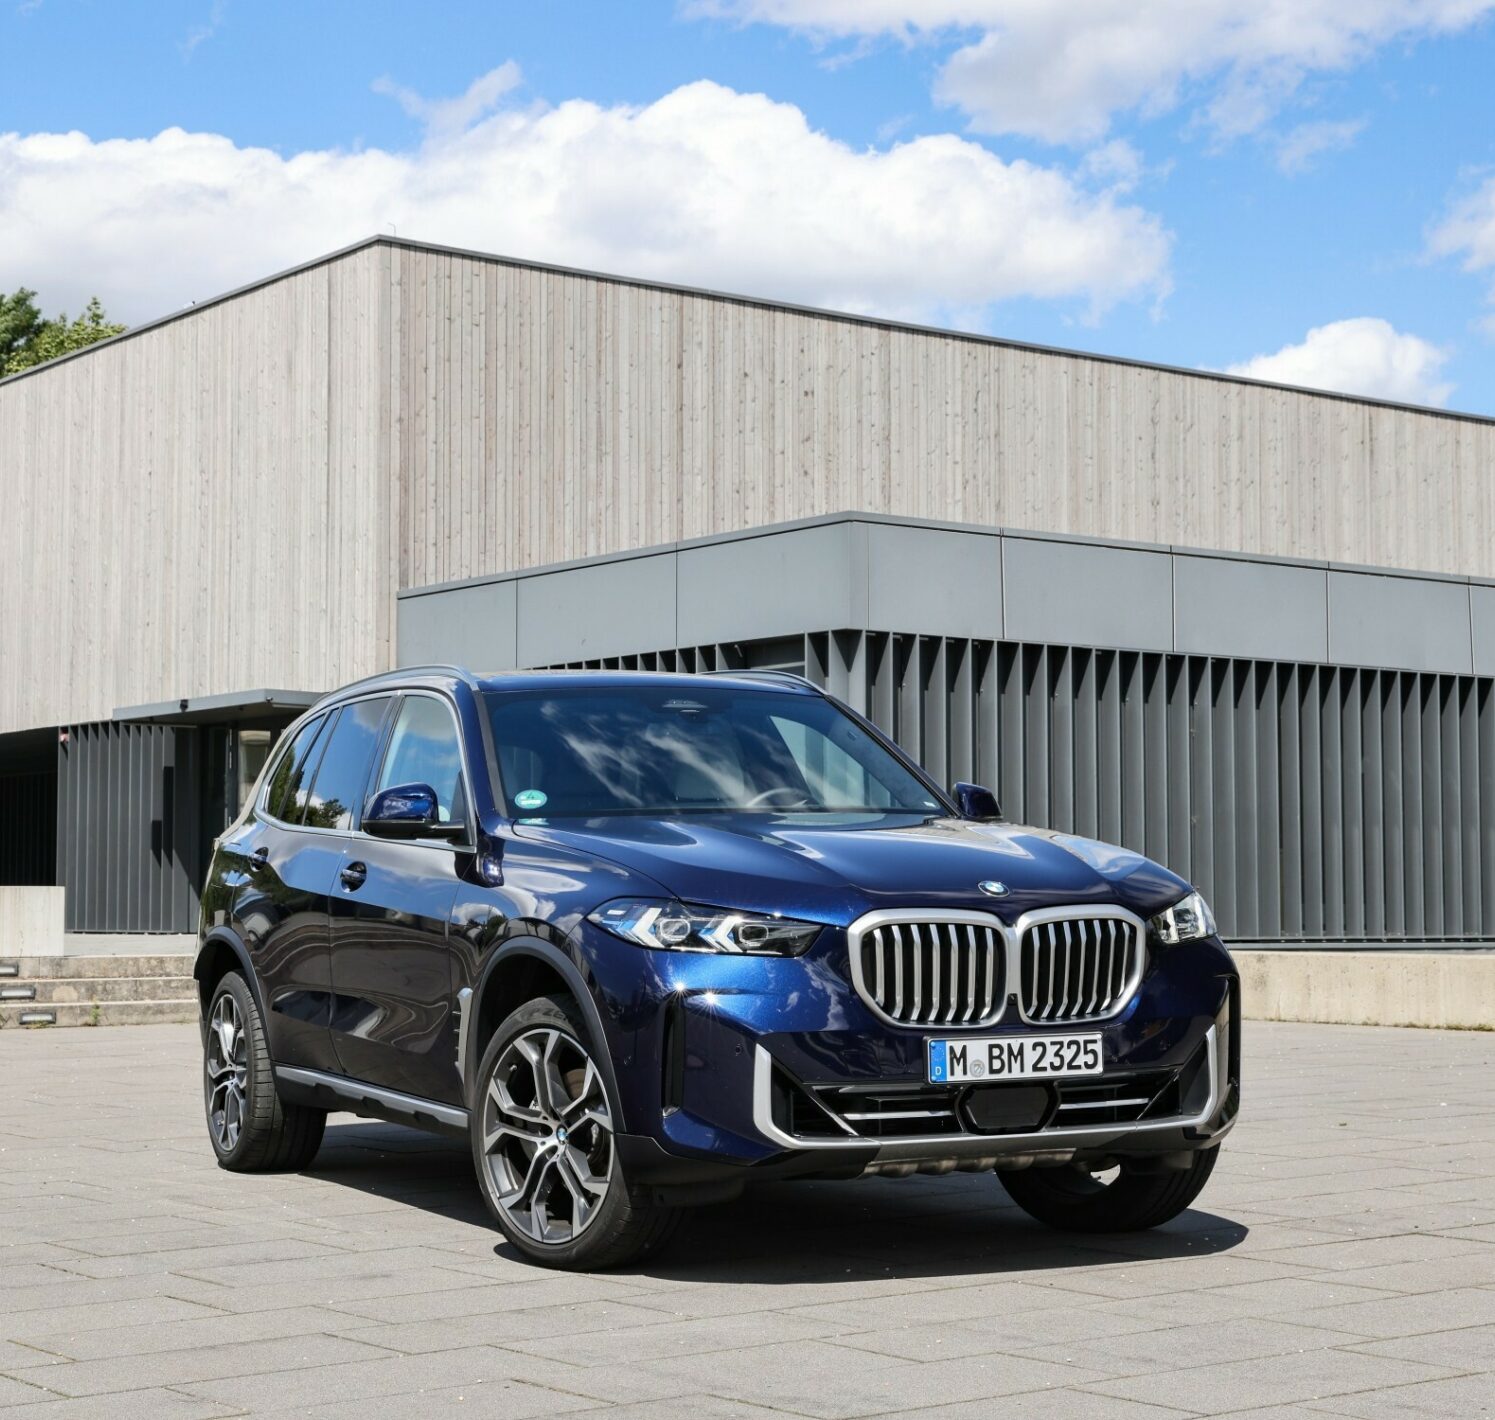 https://autofilter.sk/assets/images/x5/gallery/P90518140_lowRes_the-new-bmw-x5-08-23.jpg - obrazok